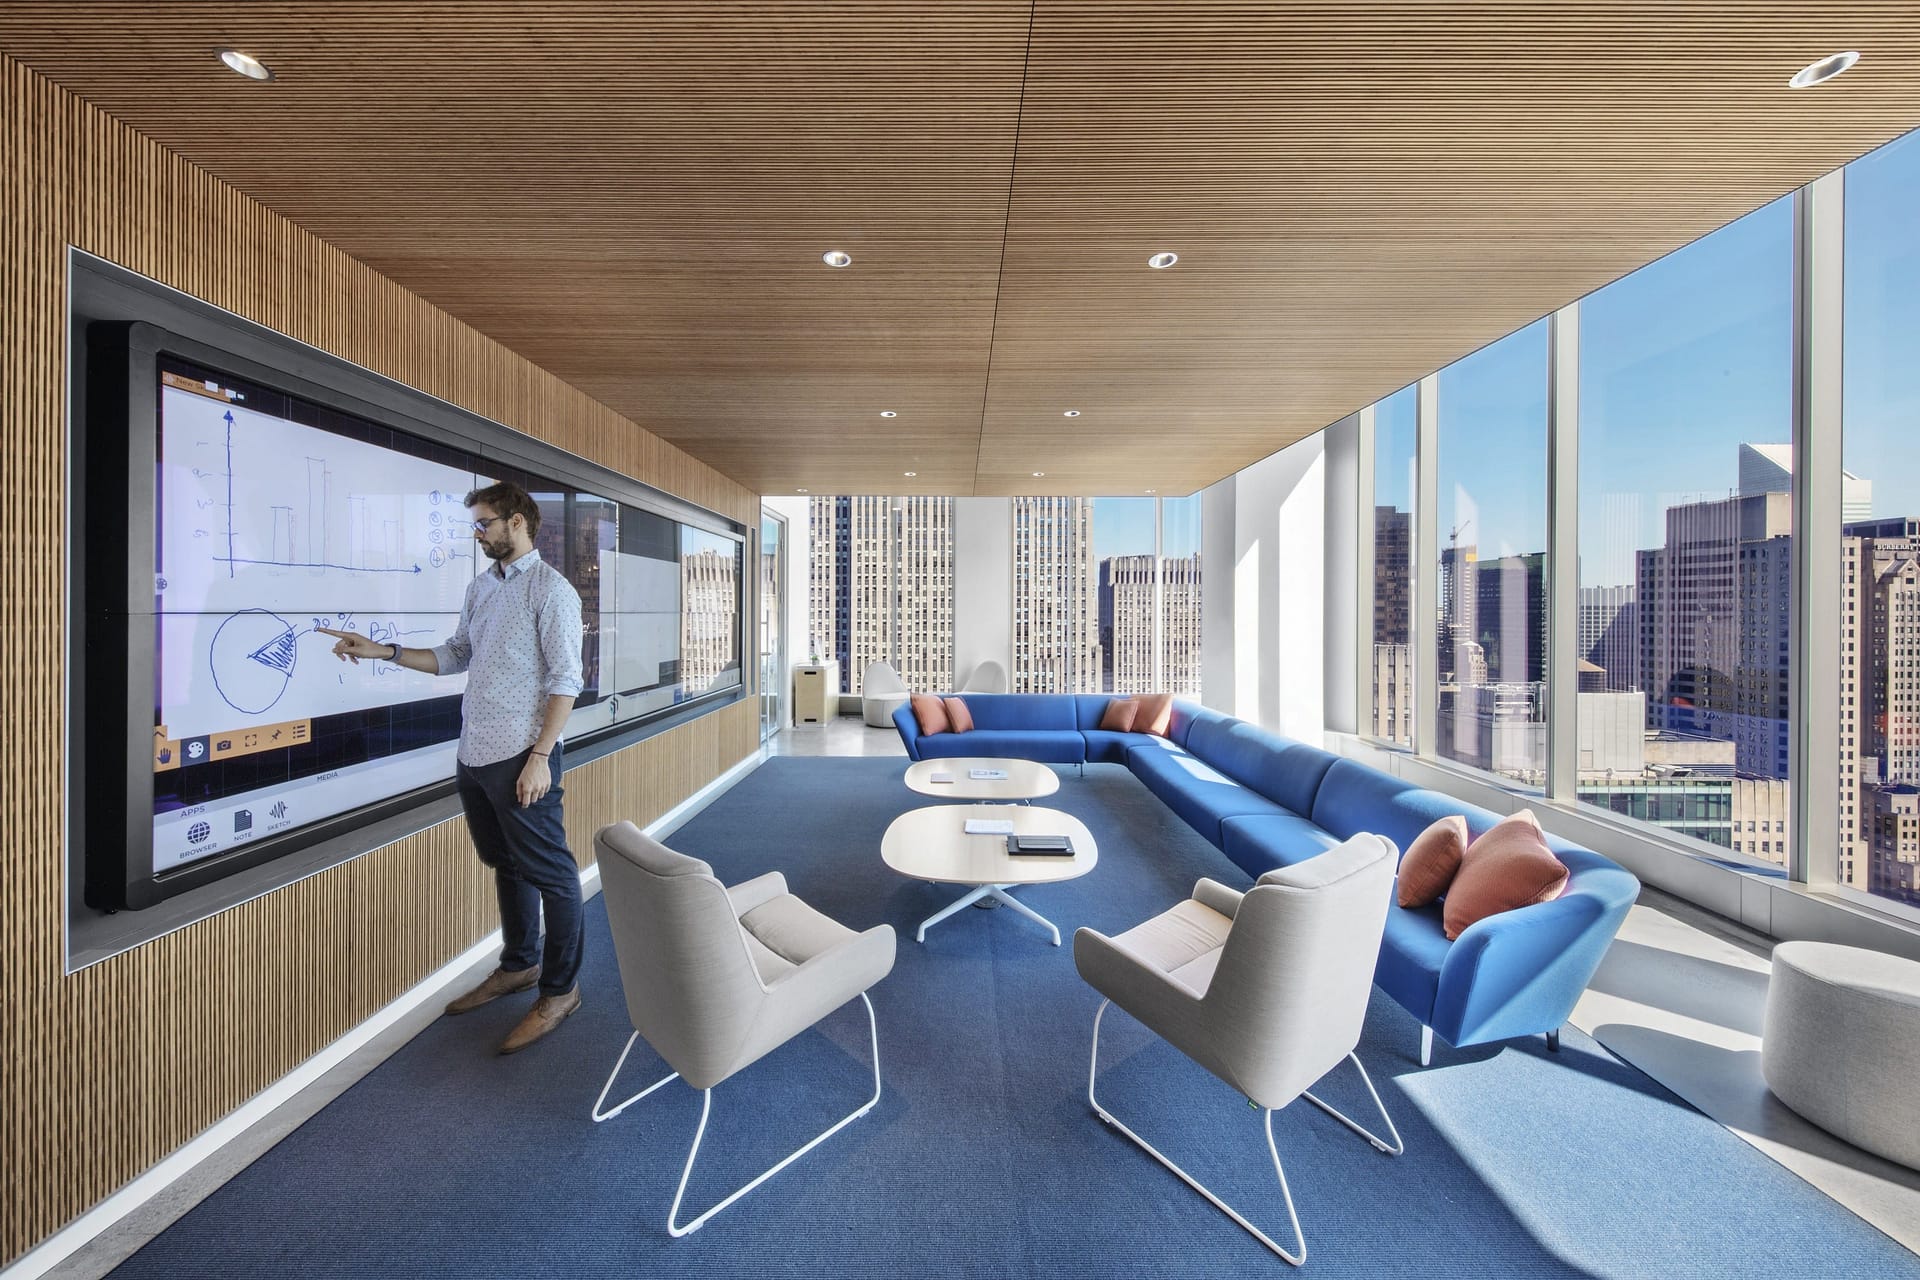 Informal workspace at the Comcast Spotlight offices